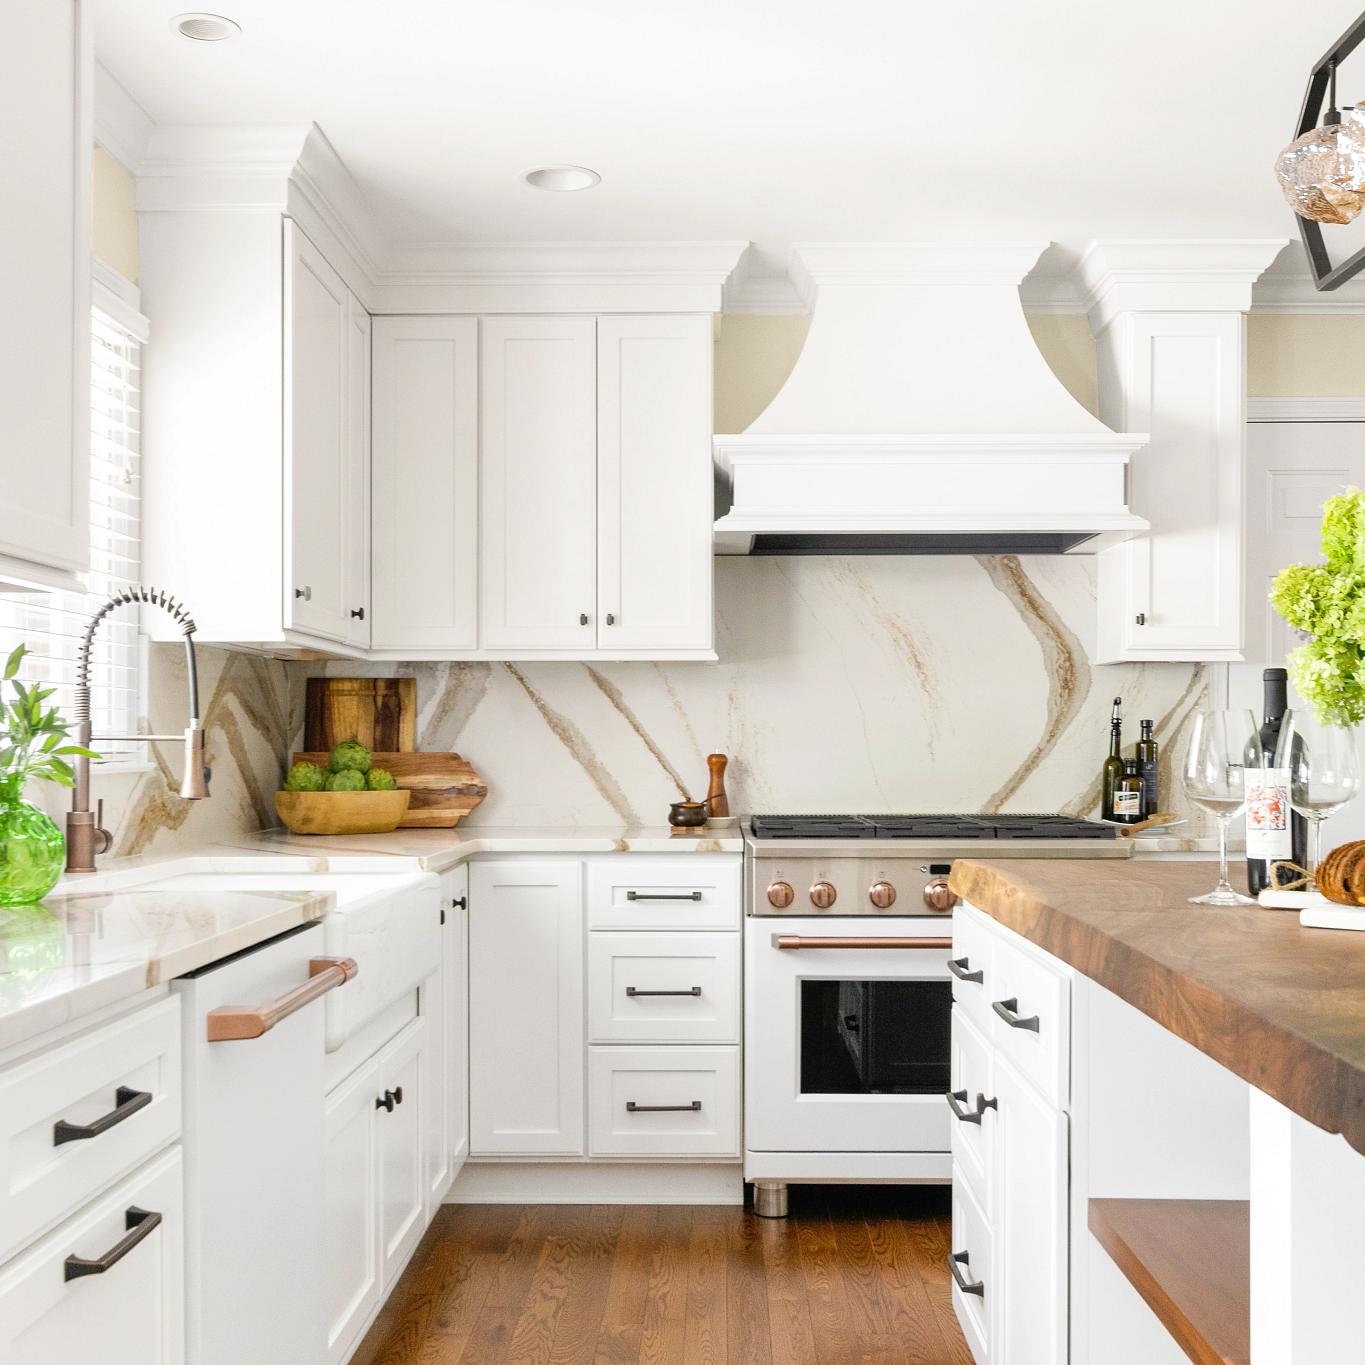 A kitchen with white cabinets

Description automatically generated